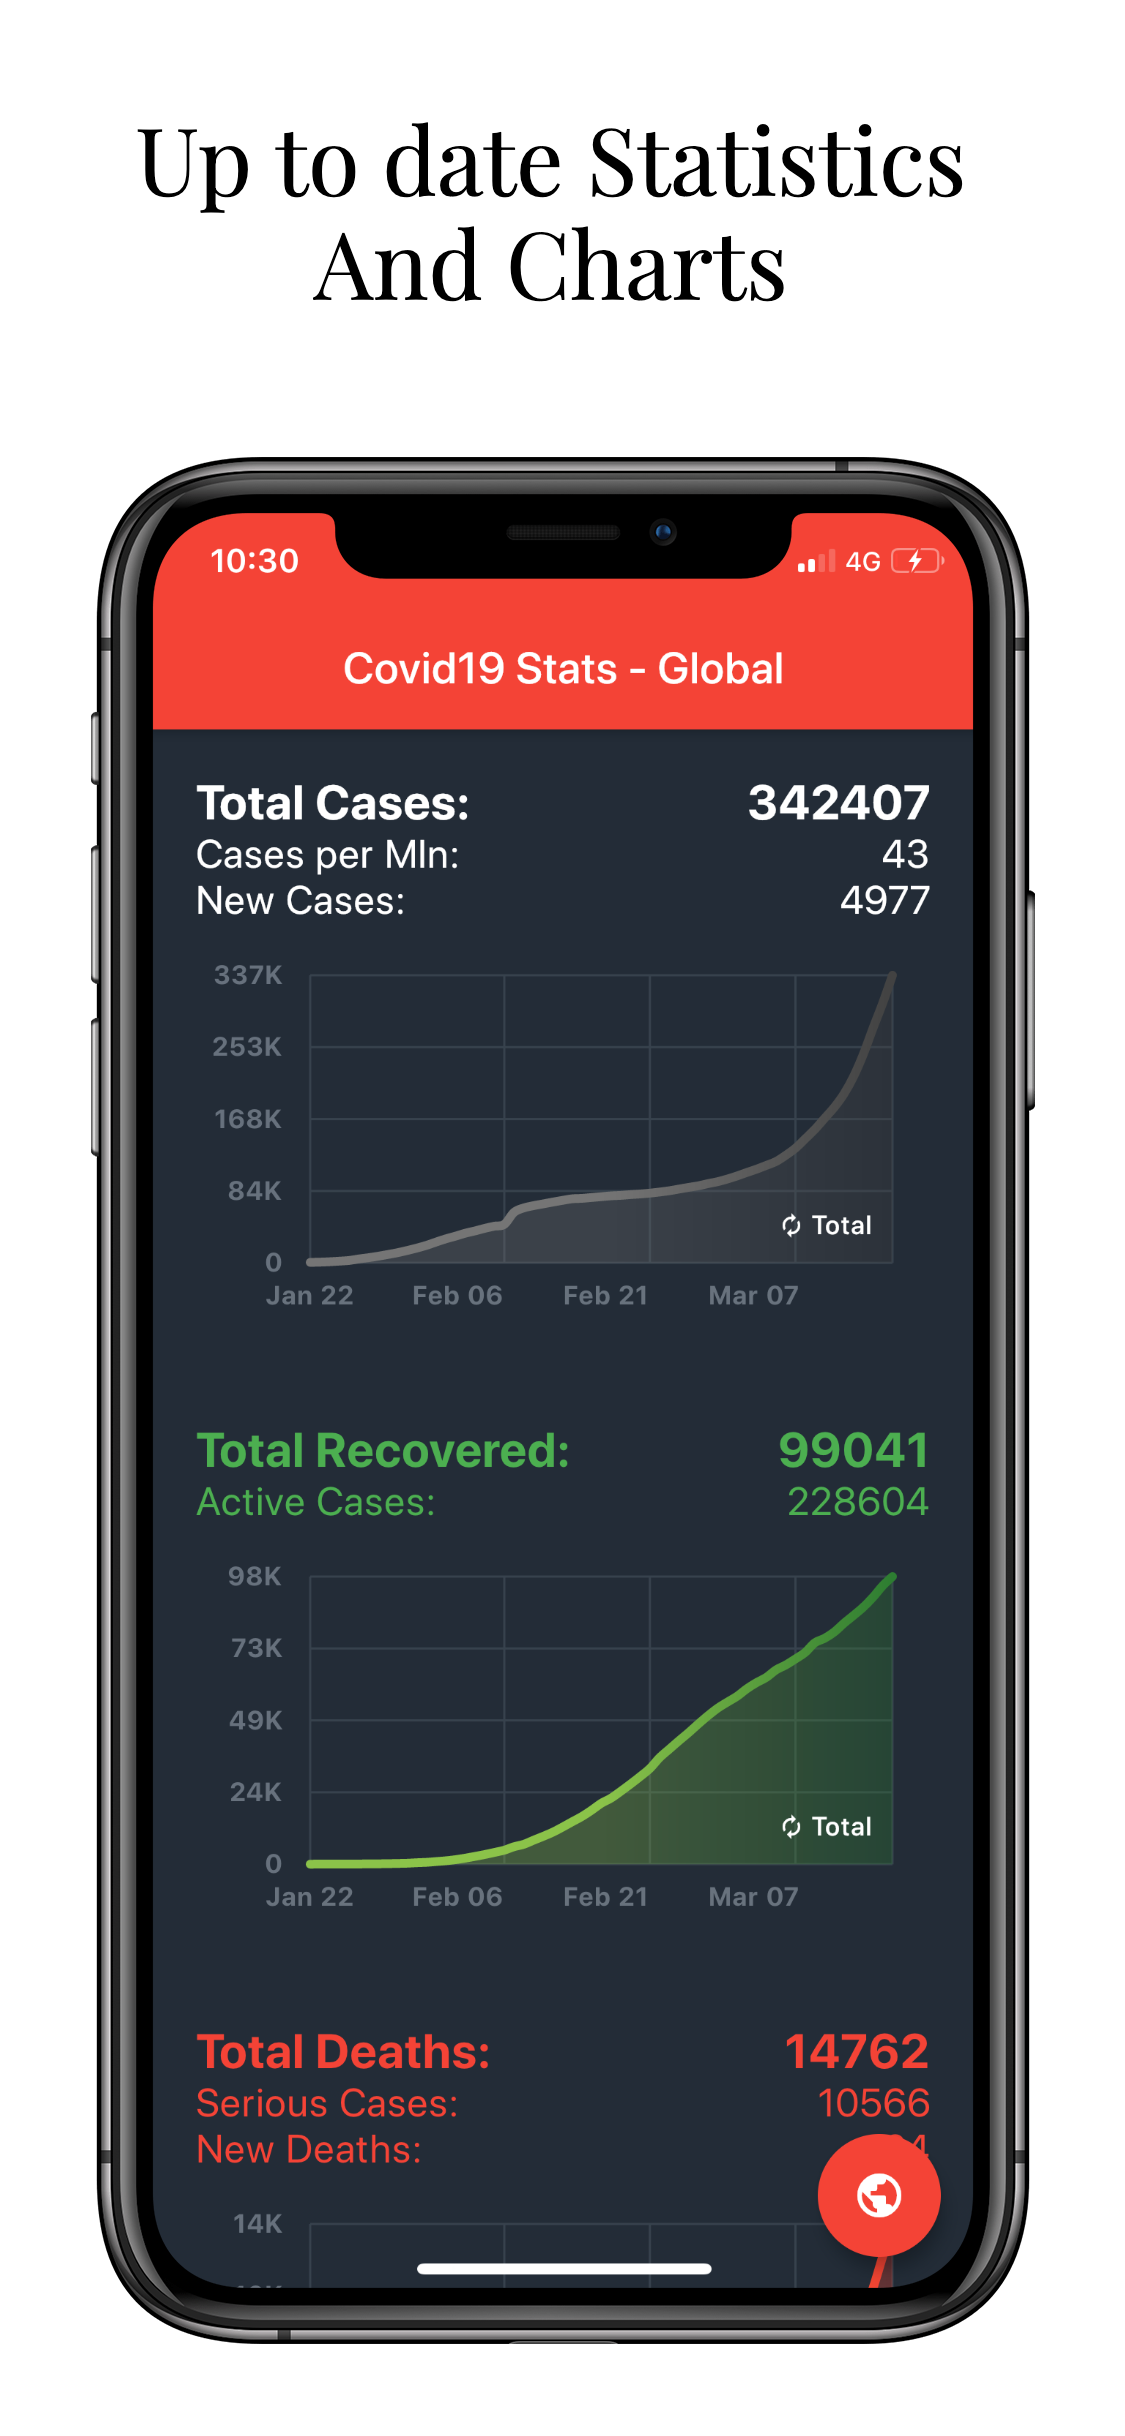 A simple mobile app developed with Flutter to visualize Covid-19 statistics